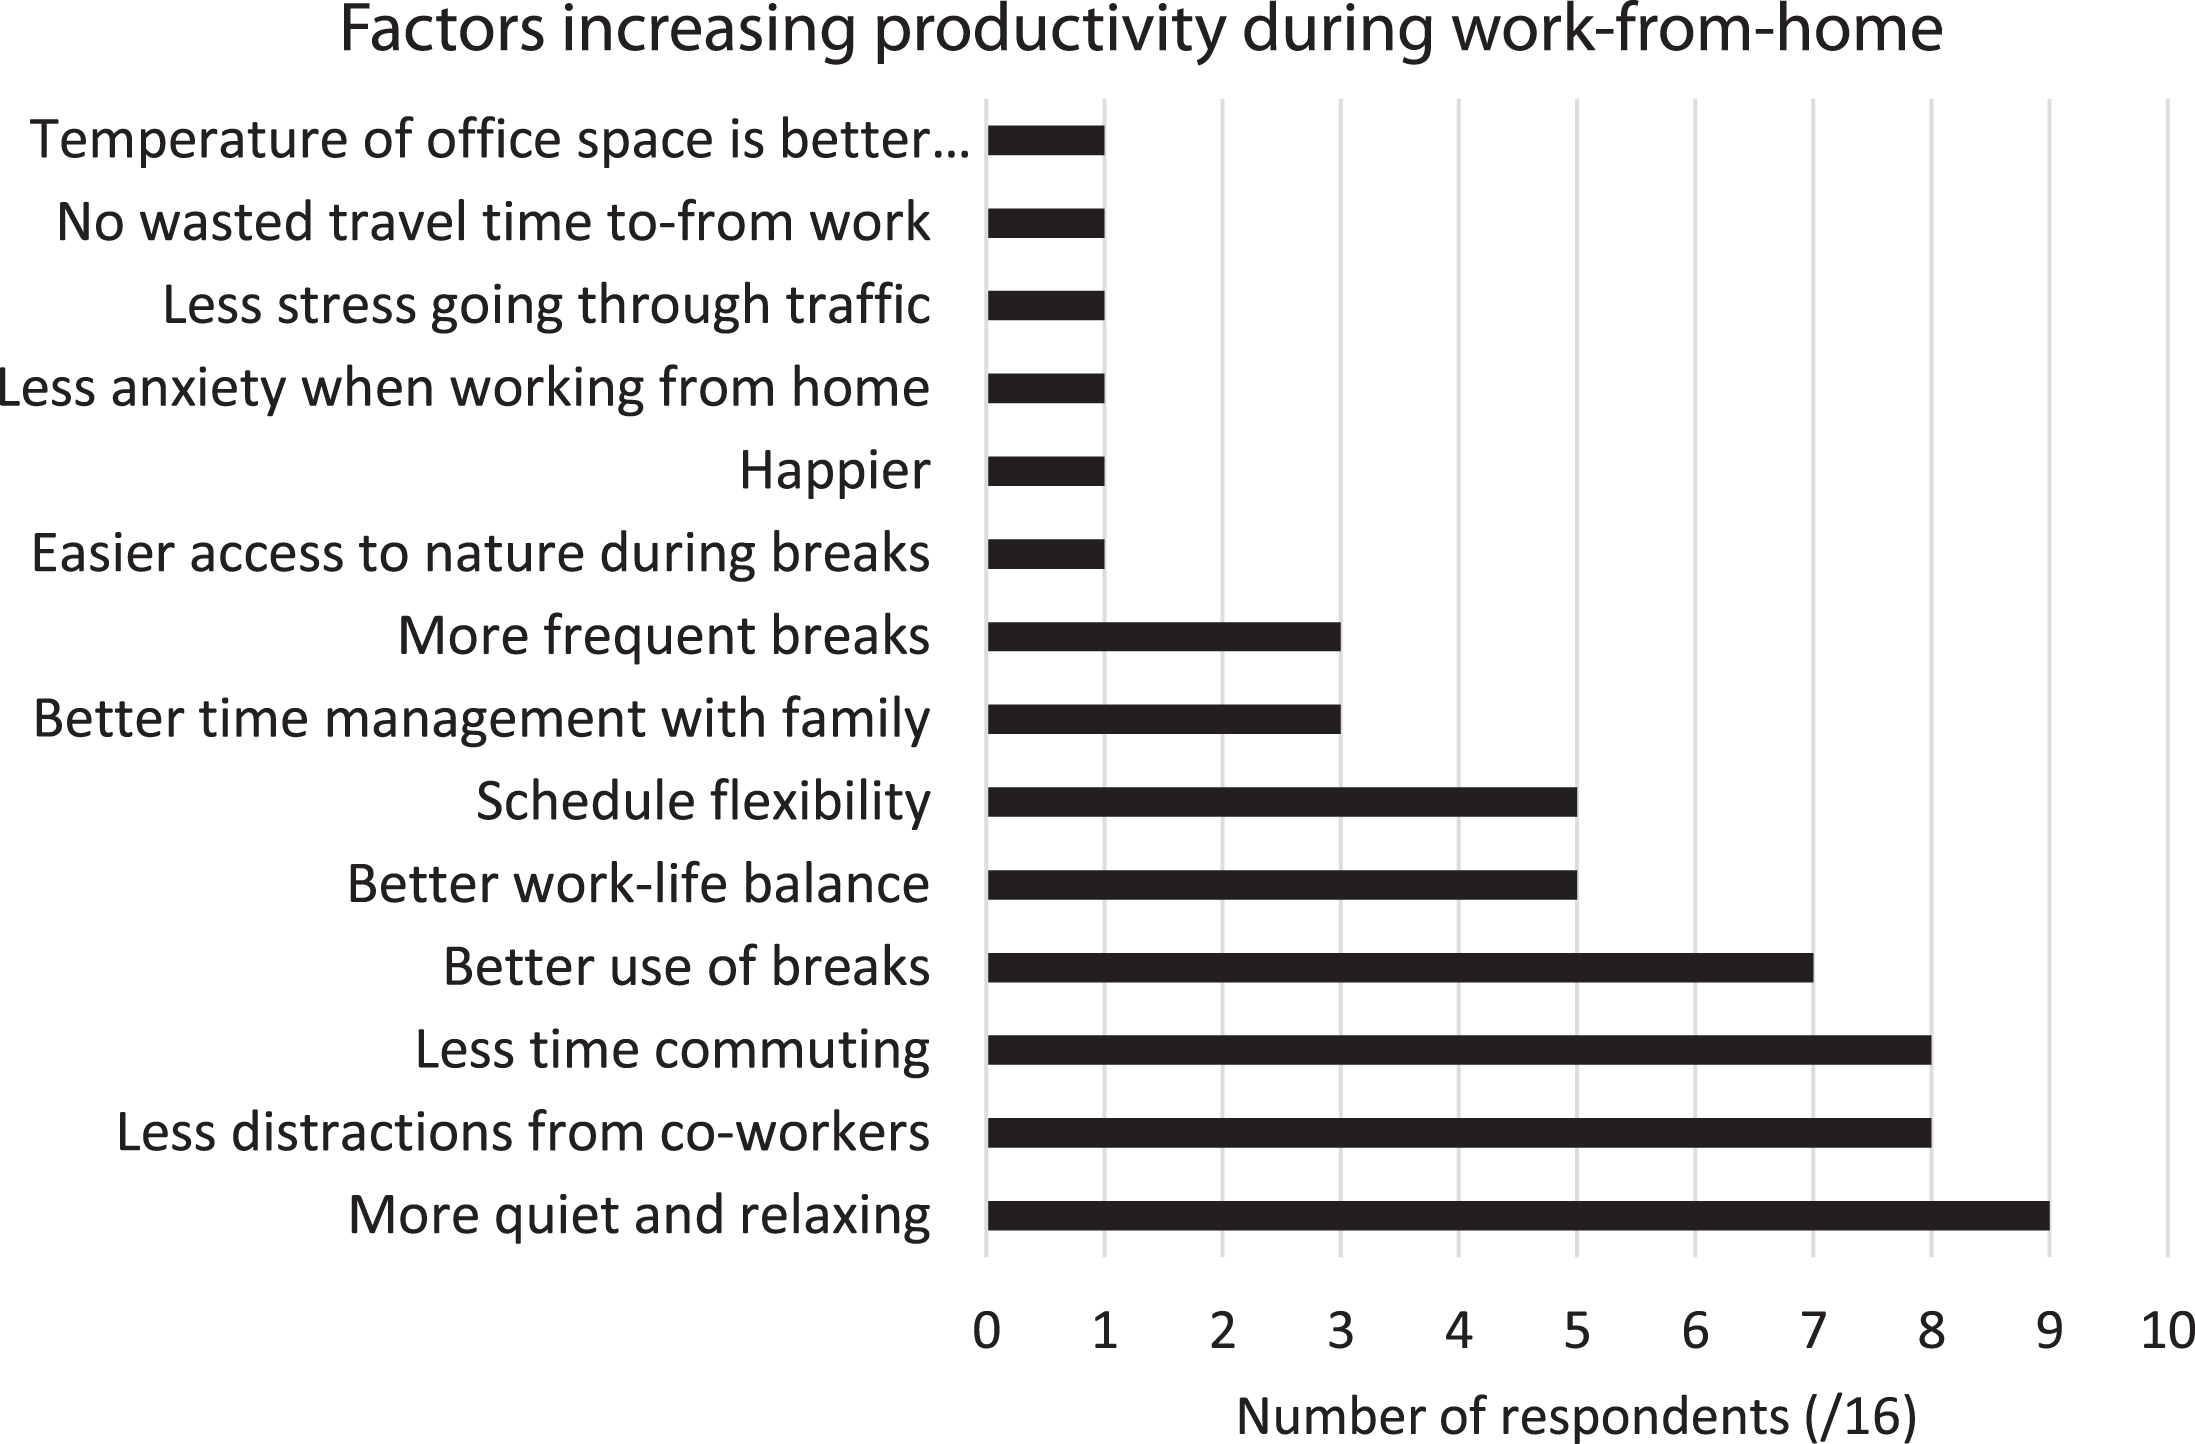 Responses to "What is causing you to be more productive working from home?". More than one response was possible.